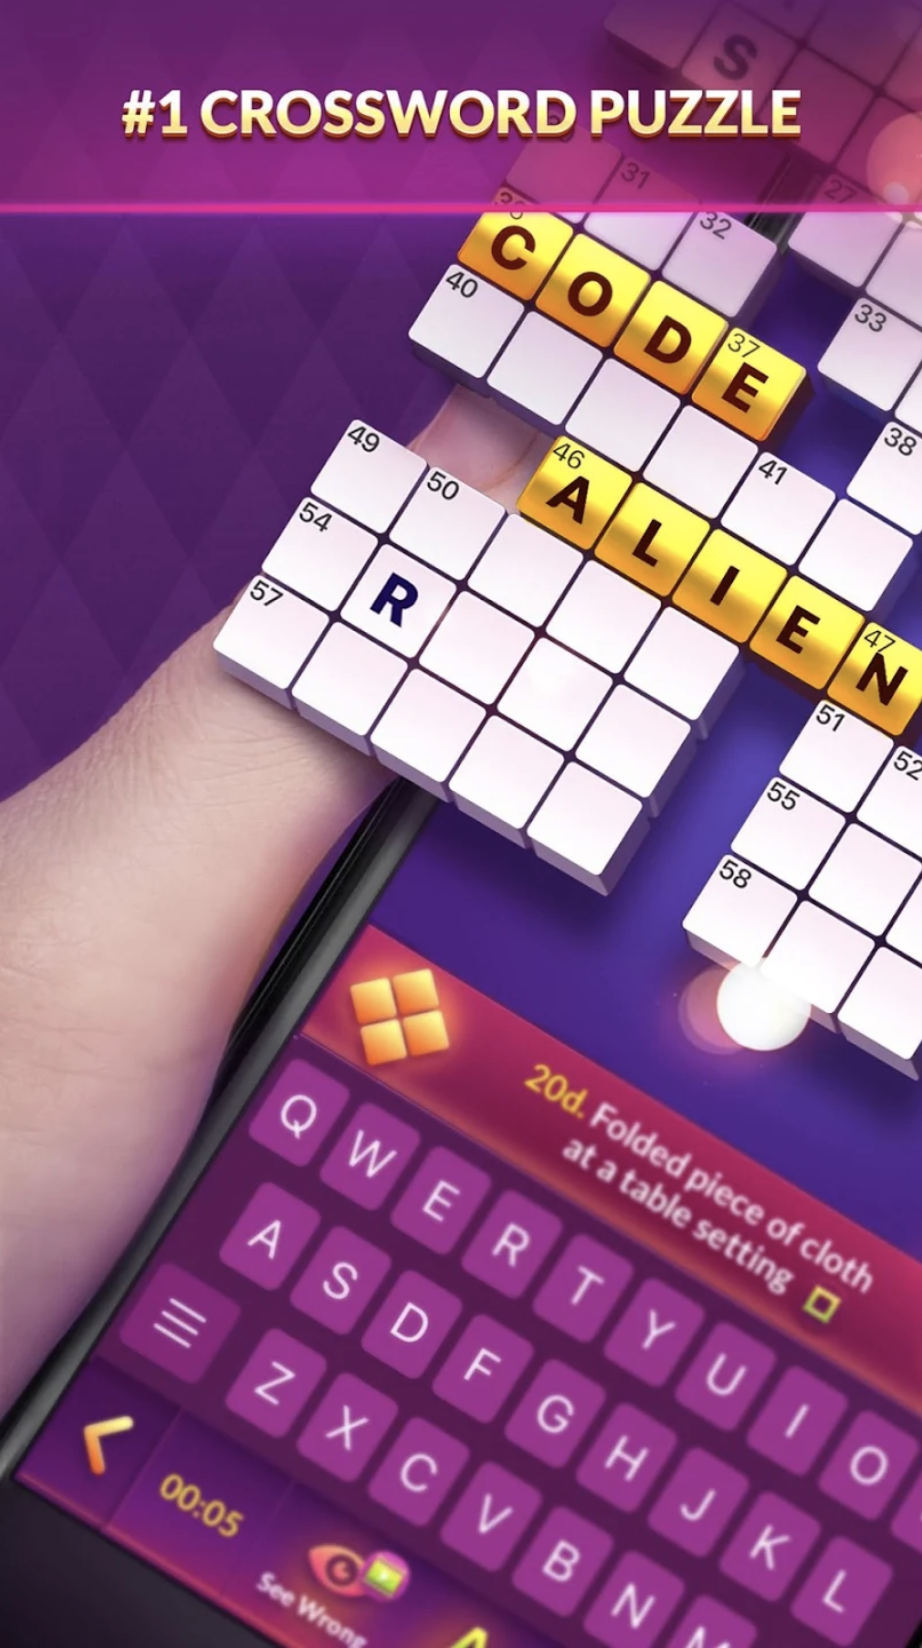 CrossWord Puzzle - Best CrossWord Solver App for Free on Android